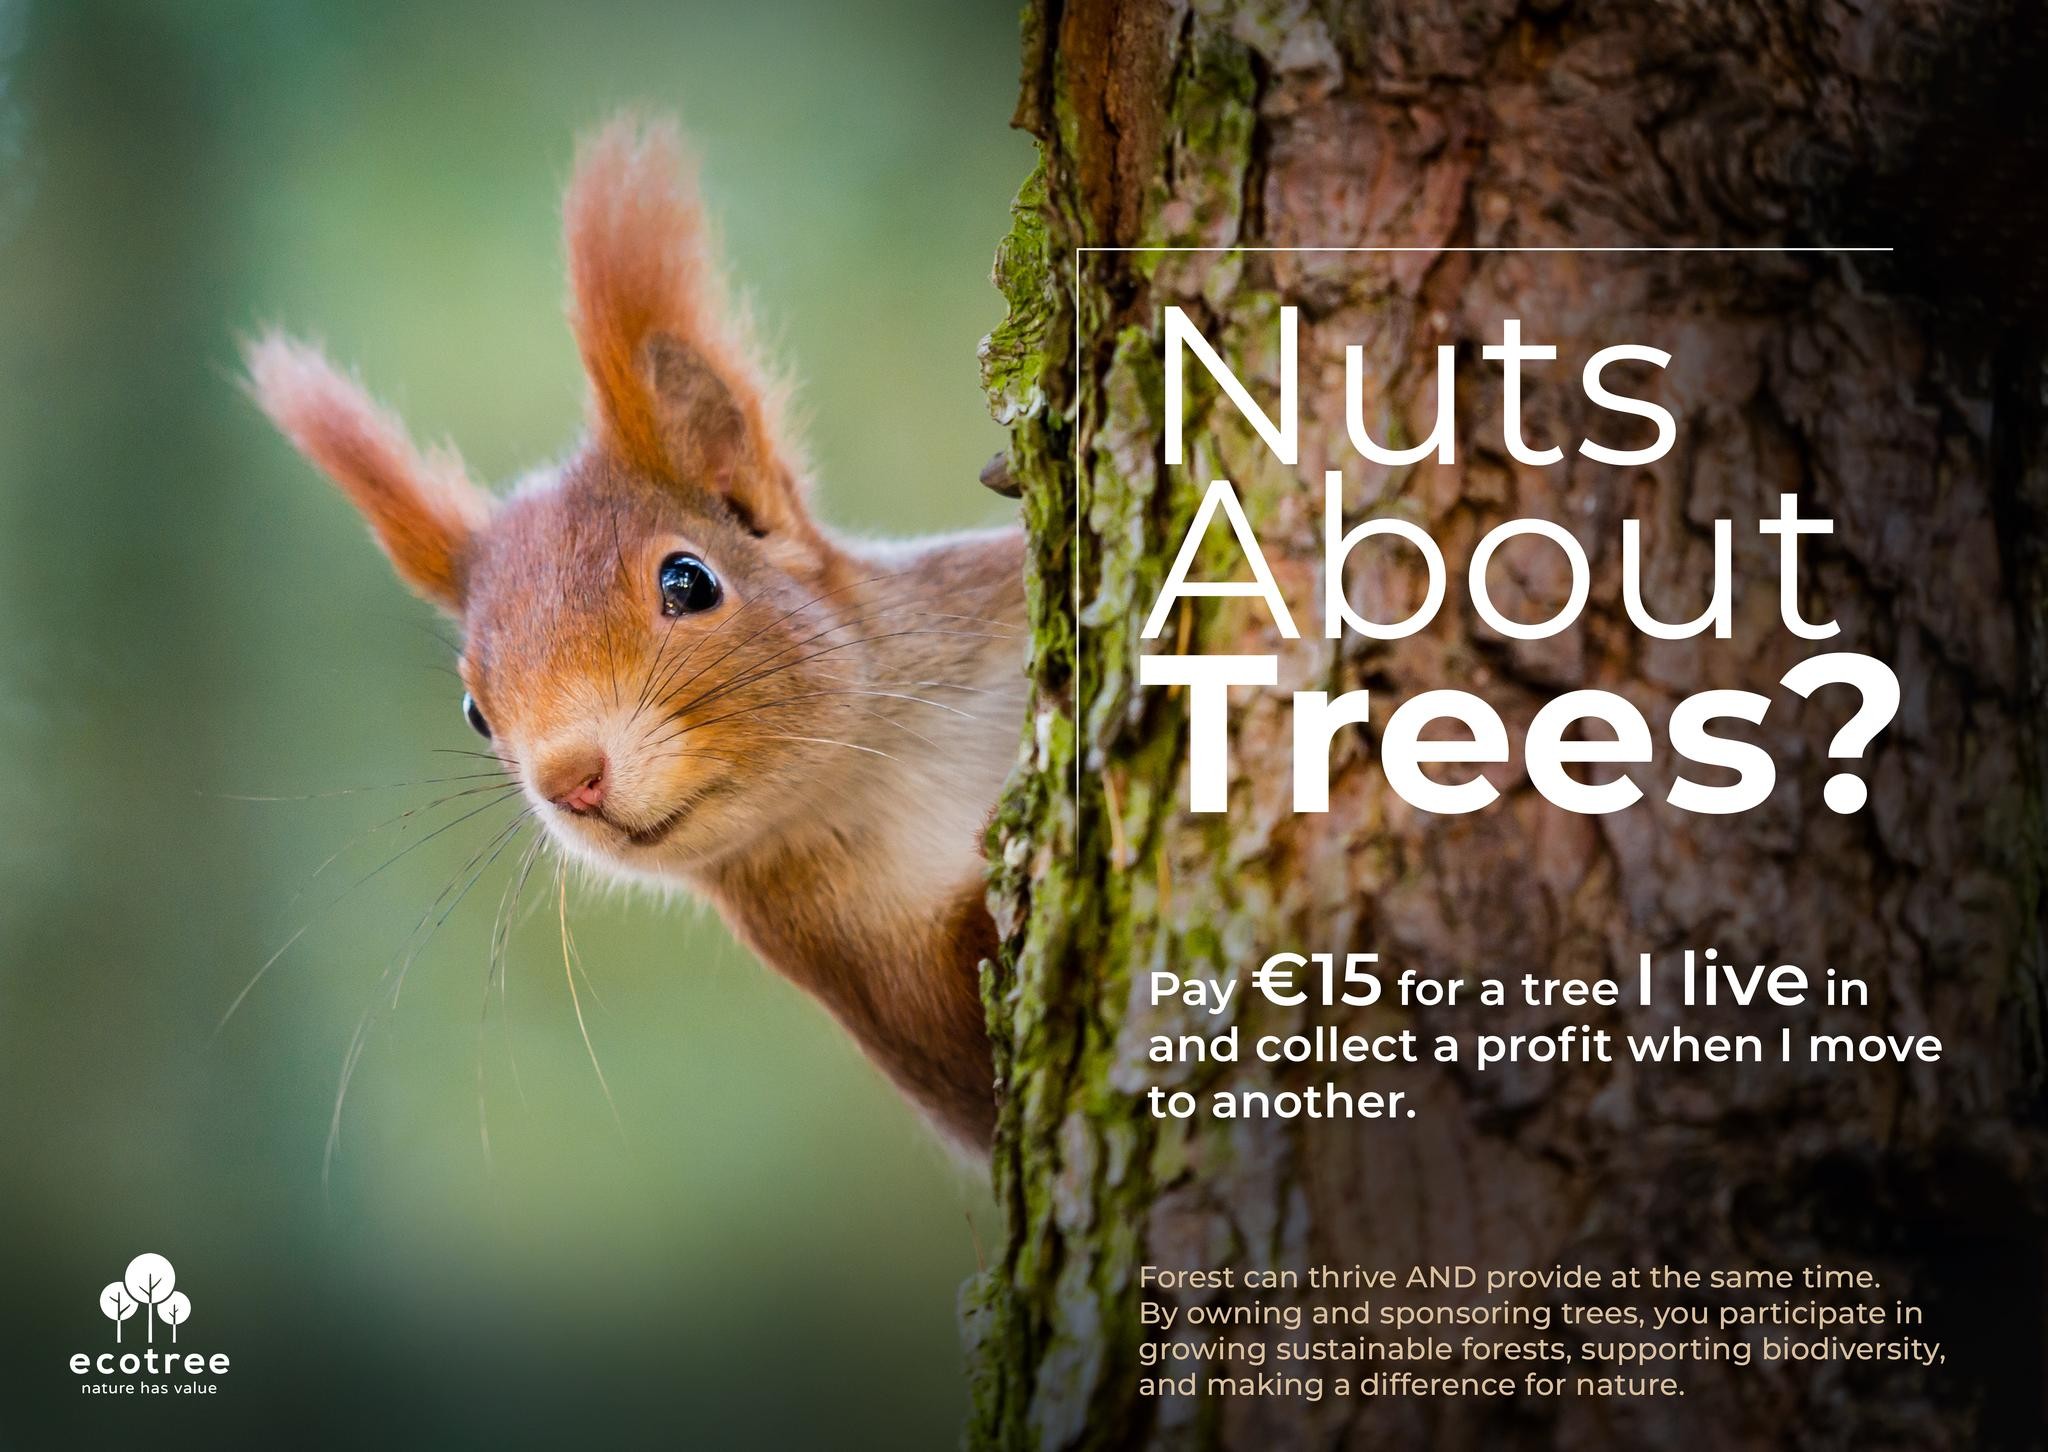 Nuts About Trees?